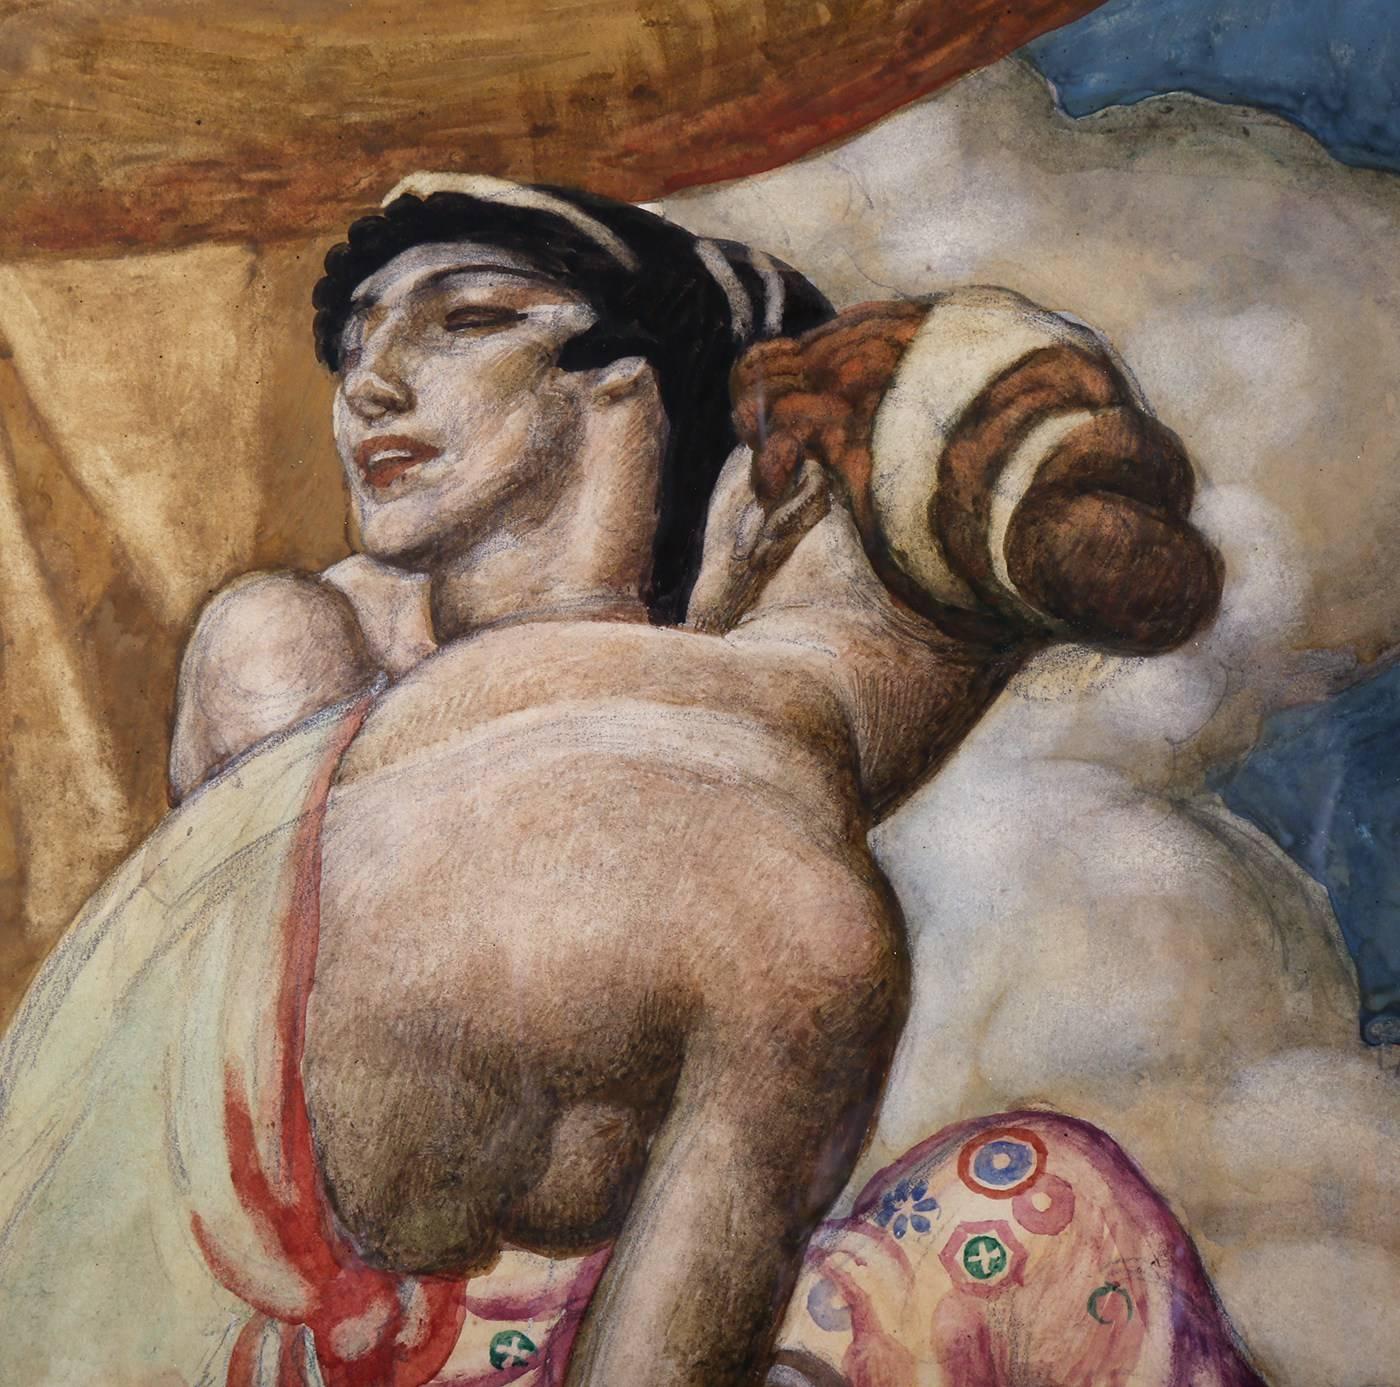 A deeply moving reflection on the tremendous loss and upheaval caused by World War I, this allegorical preparatory painting by the American artist, sculptor and muralist Eugene Savage was a preliminary study for one of the epic murals that grace the